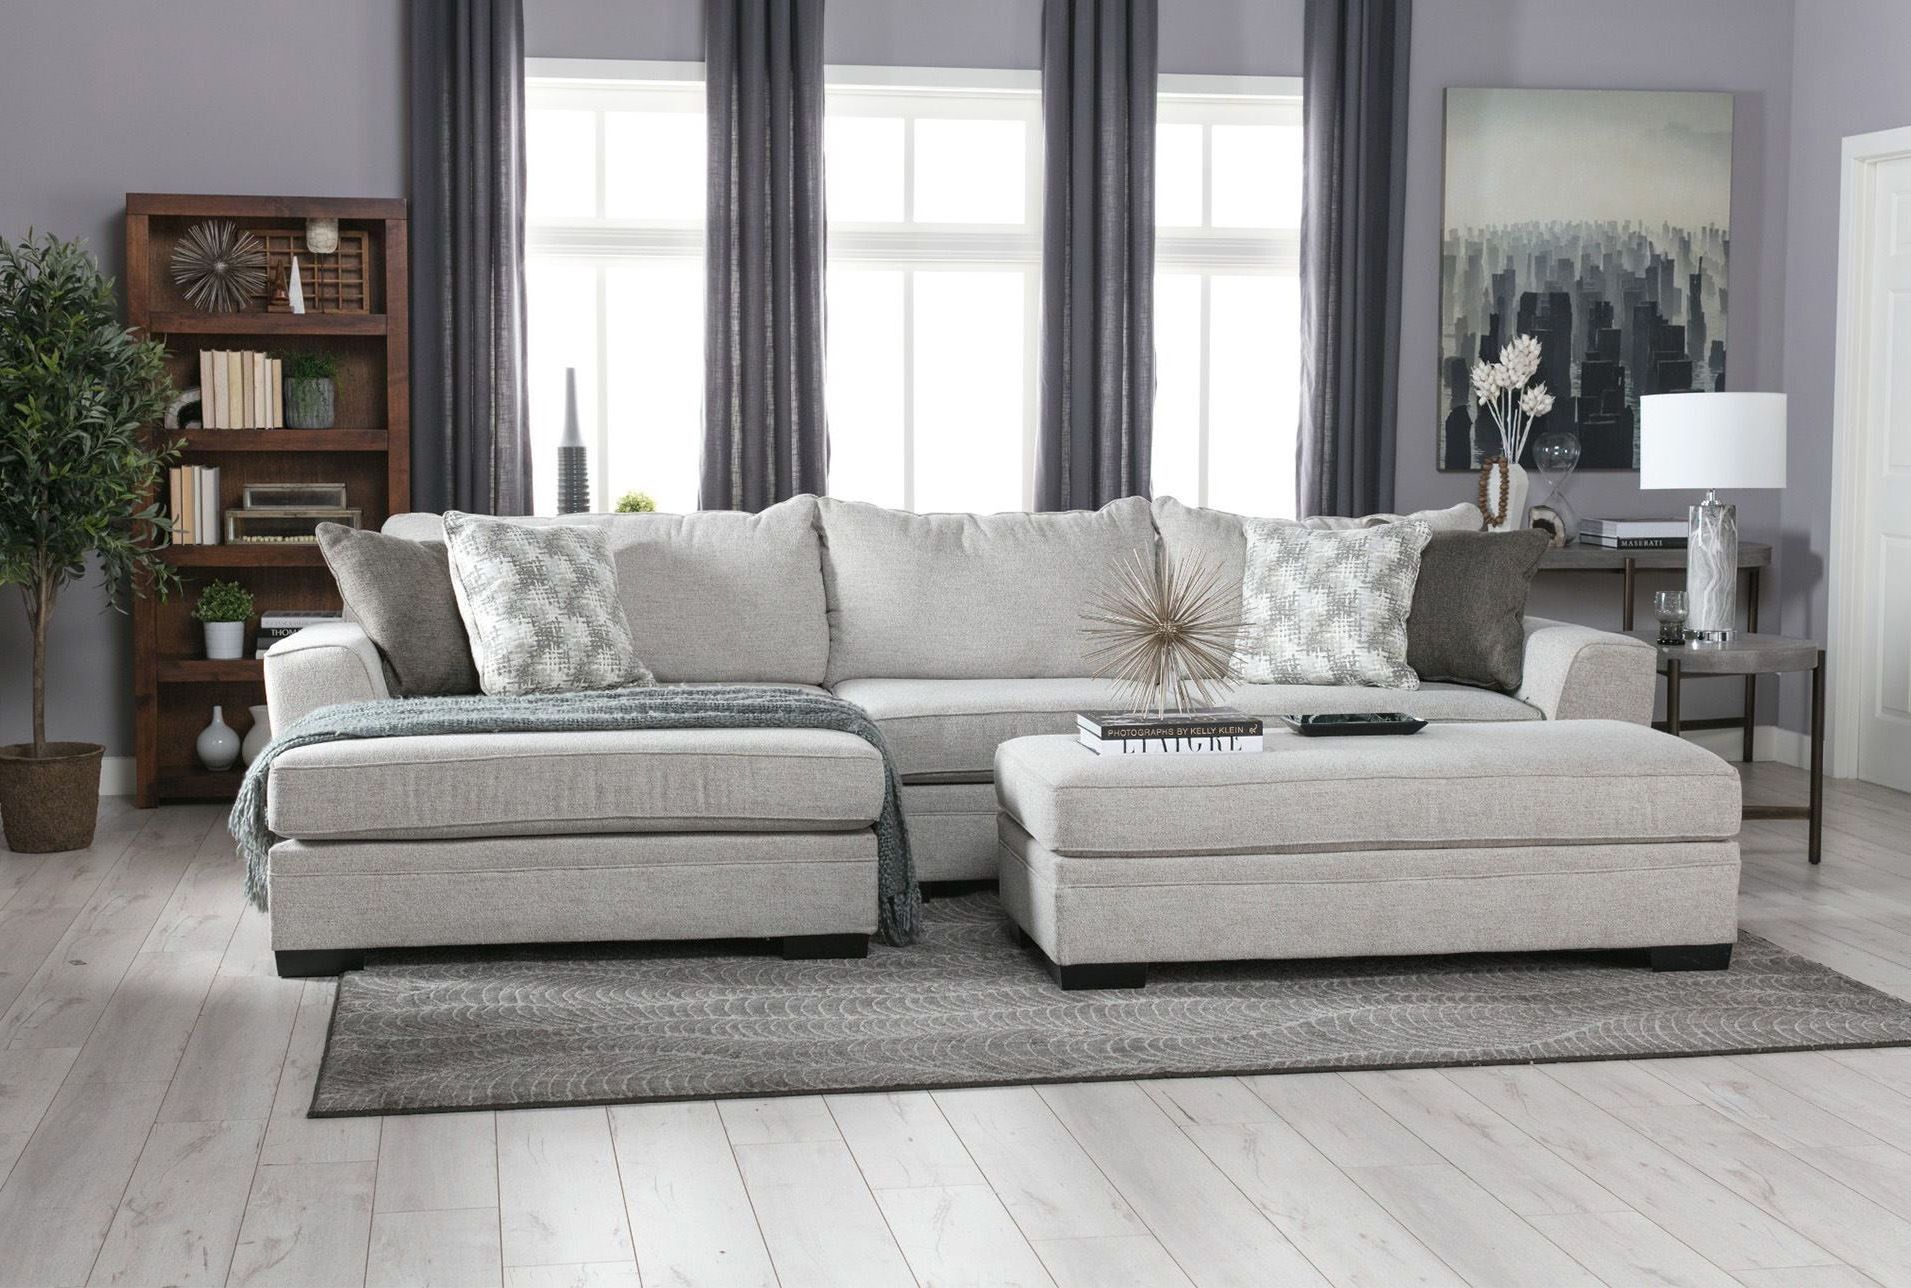 Living With Regard To Trendy Aquarius Light Grey 2 Piece Sectionals With Laf Chaise (View 7 of 20)